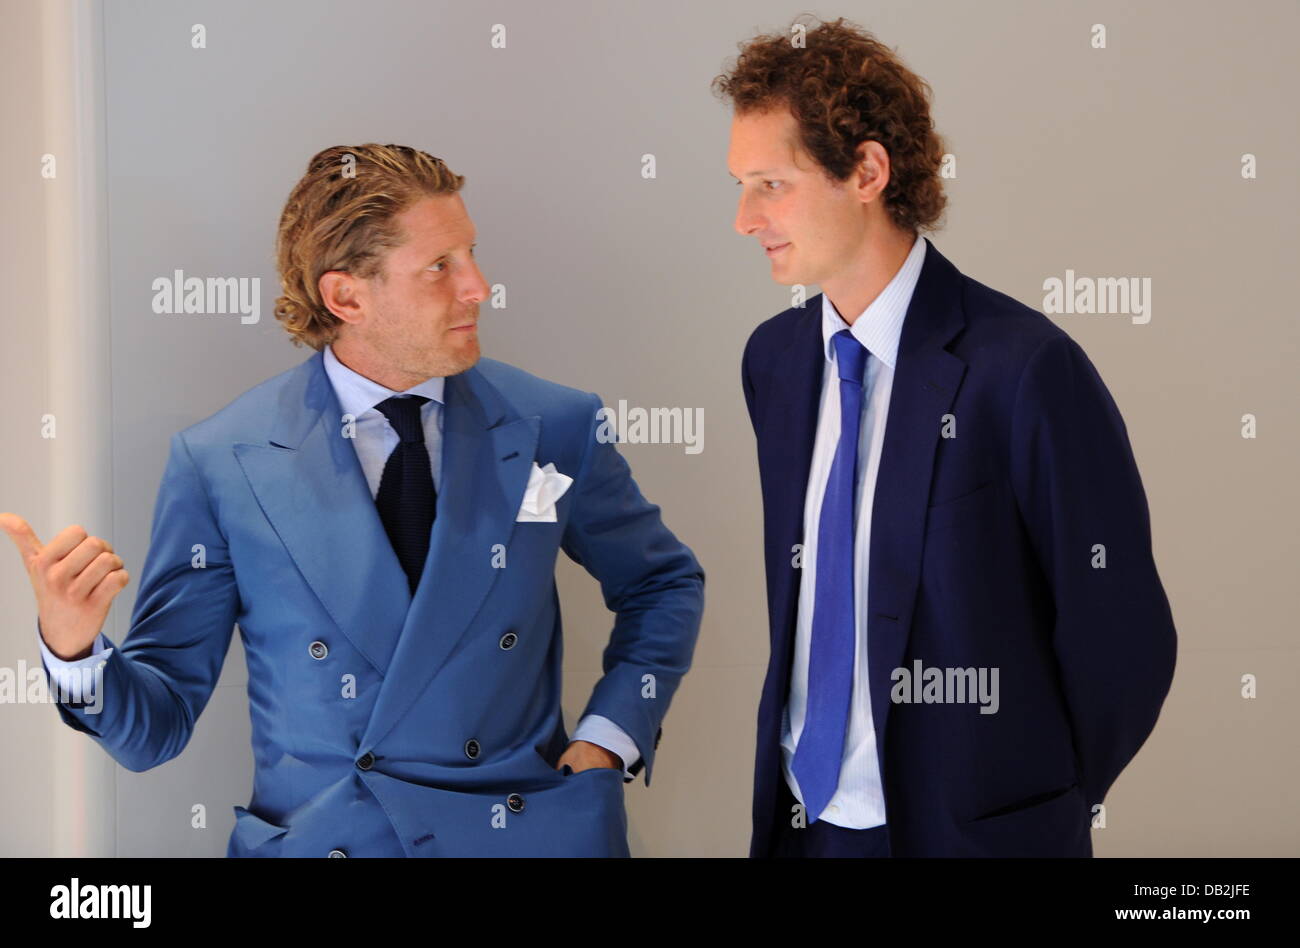 John Elkann High Resolution Stock Photography and Images - Alamy